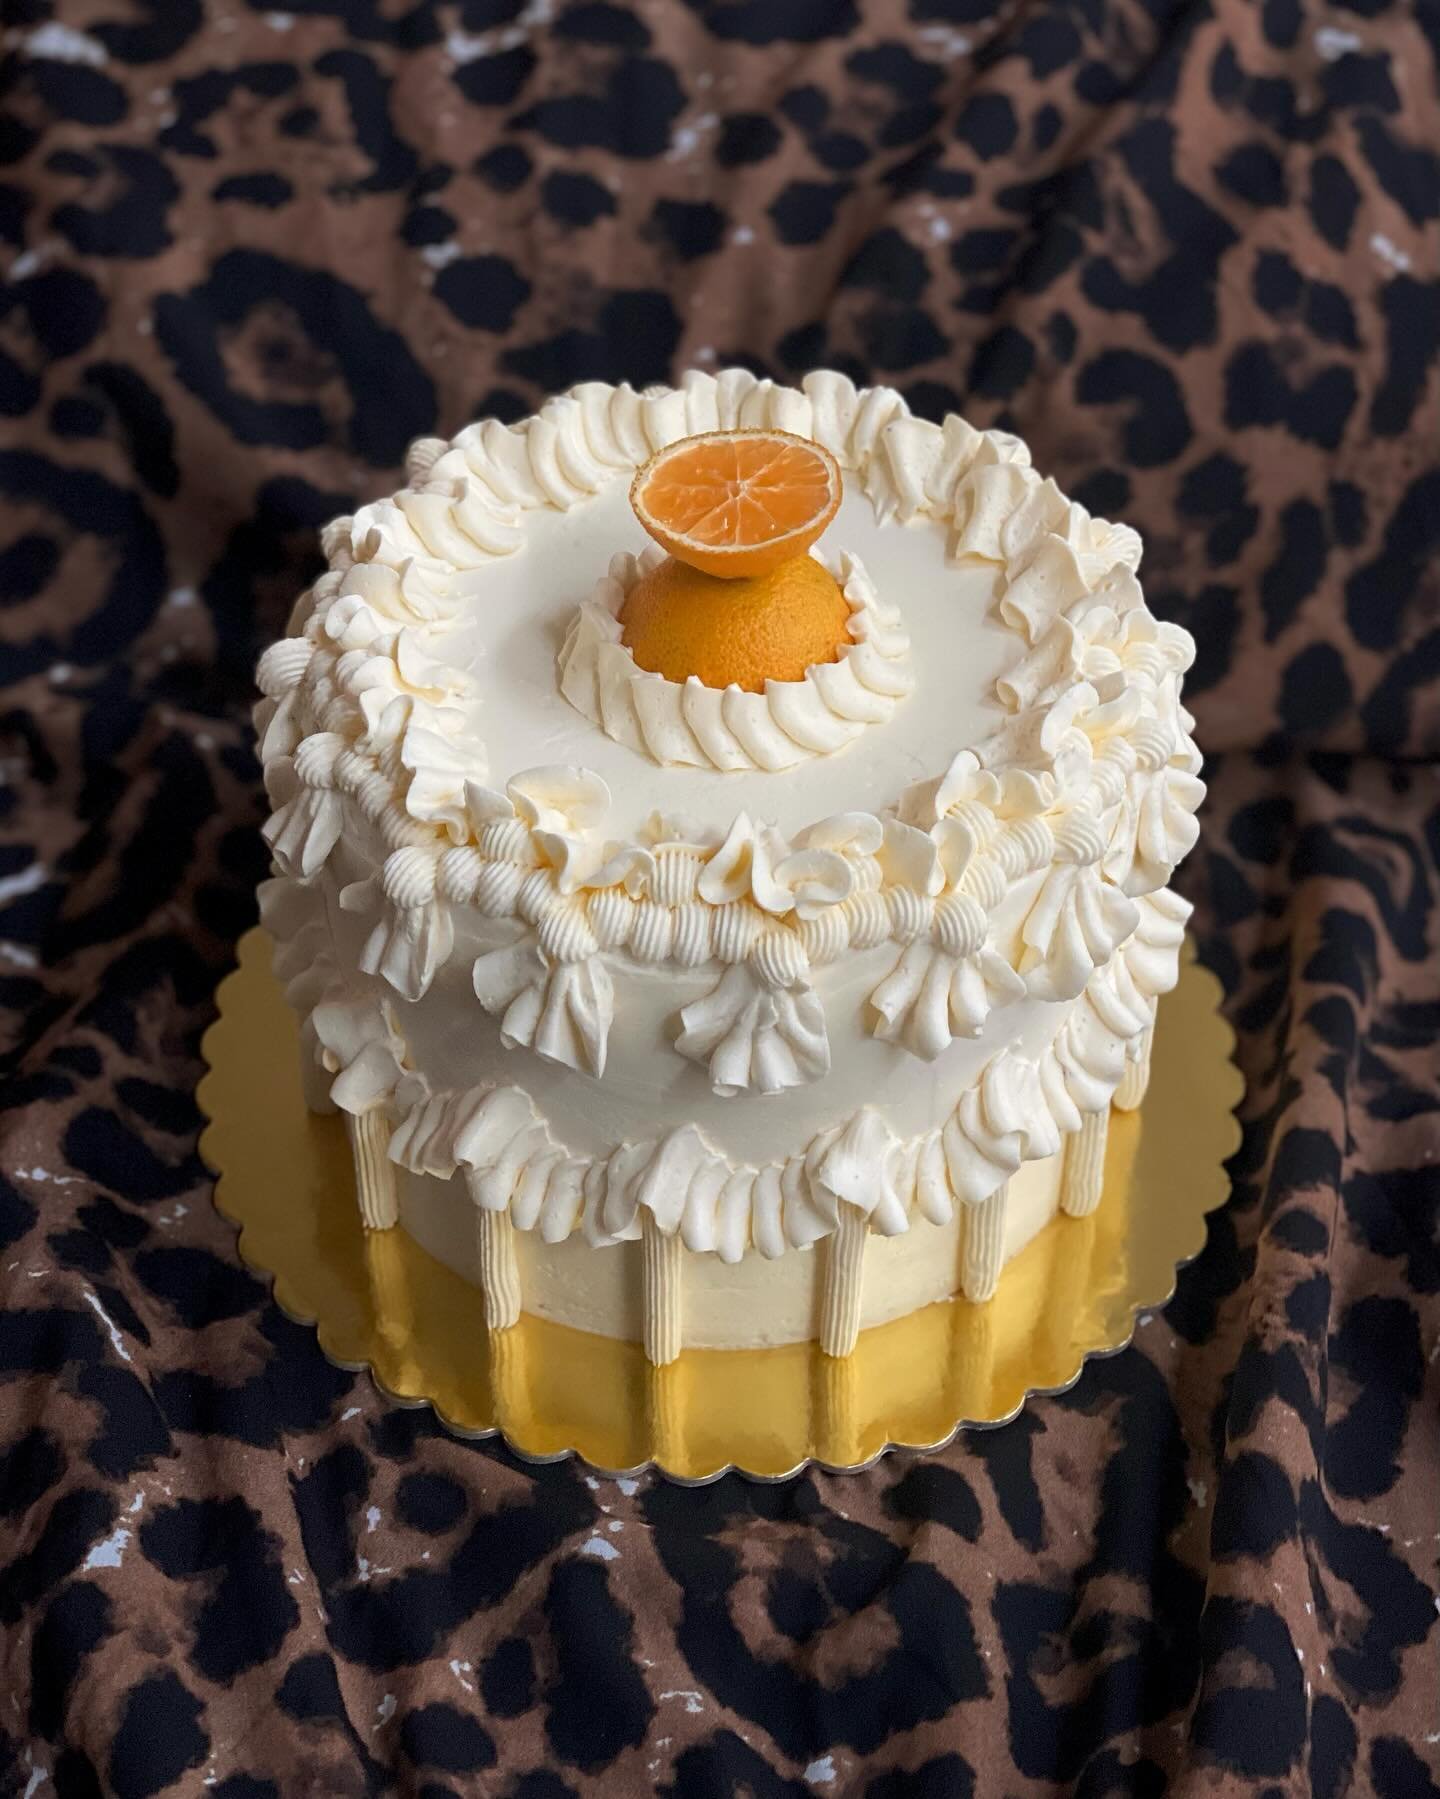 a december wedding moment 🍊 commissioned by @pickle_samwich for megan and lalo 🫶 tangy clementine chiffon, salted saffron whipped cream, roasted walnut and black lime cream, charred clementine peel italian meringue buttercream